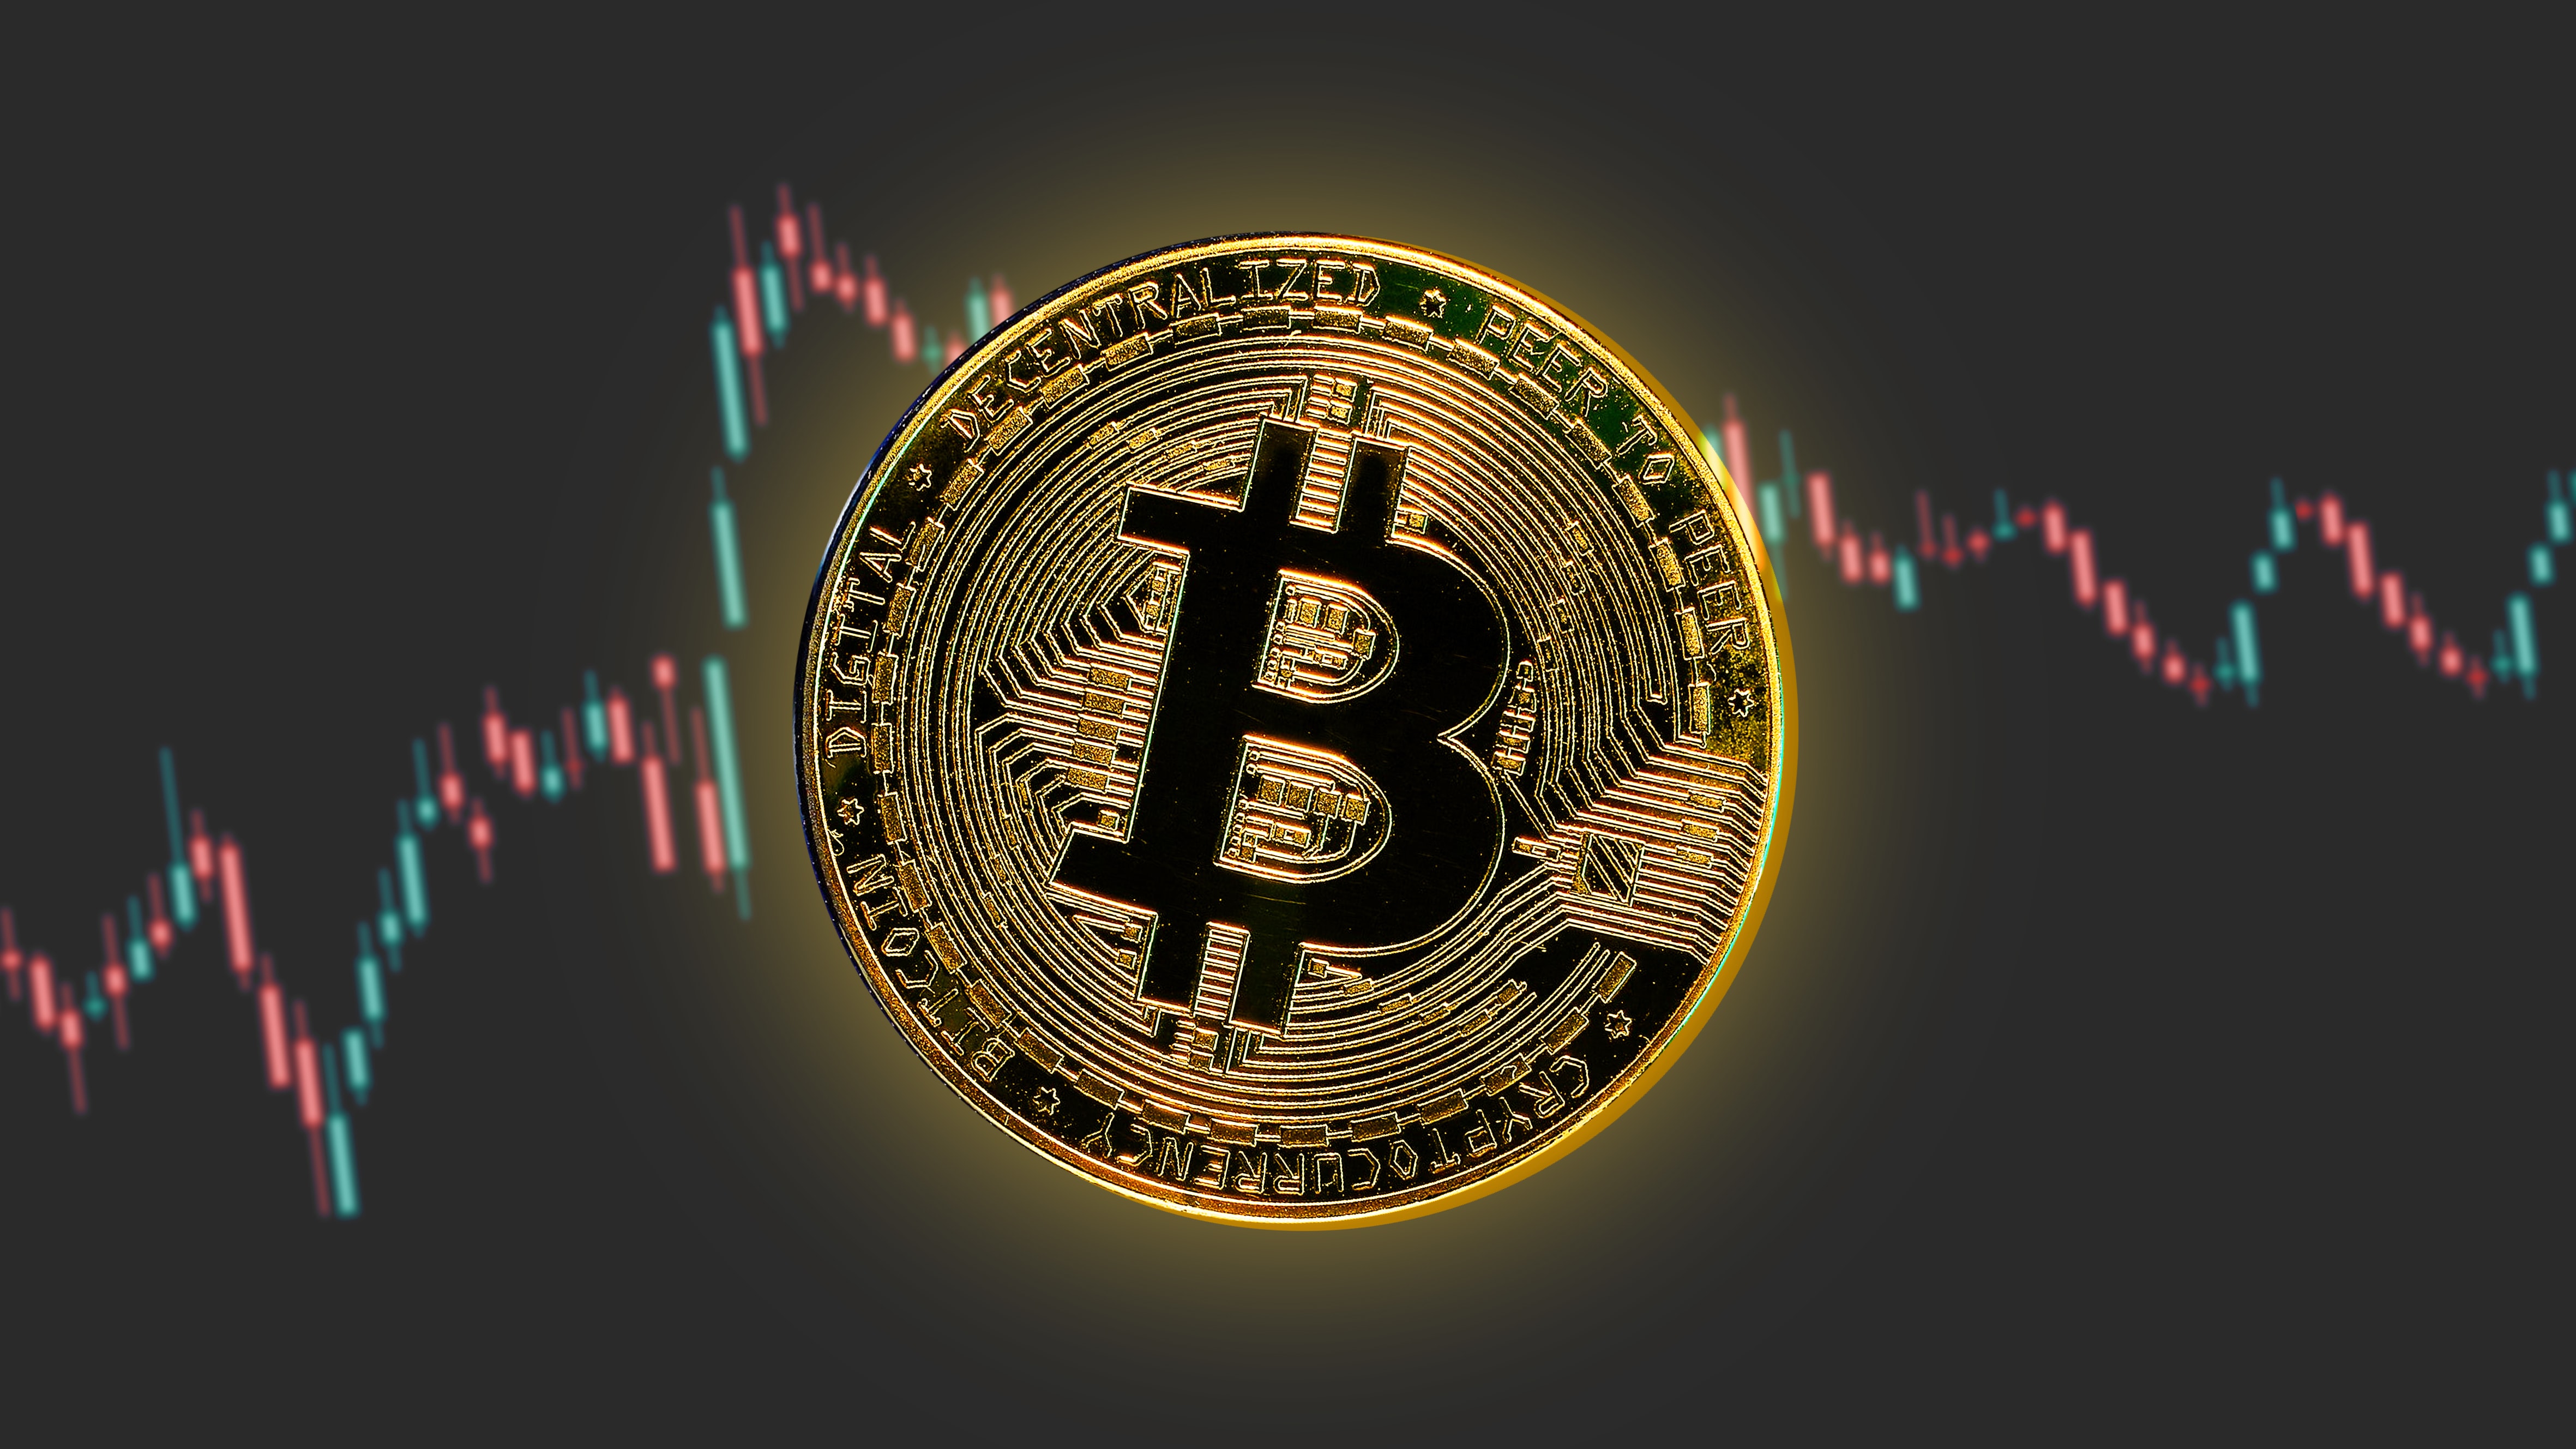 Bitcoin Derivatives Reserve Surges Up, More Volatility Soon?